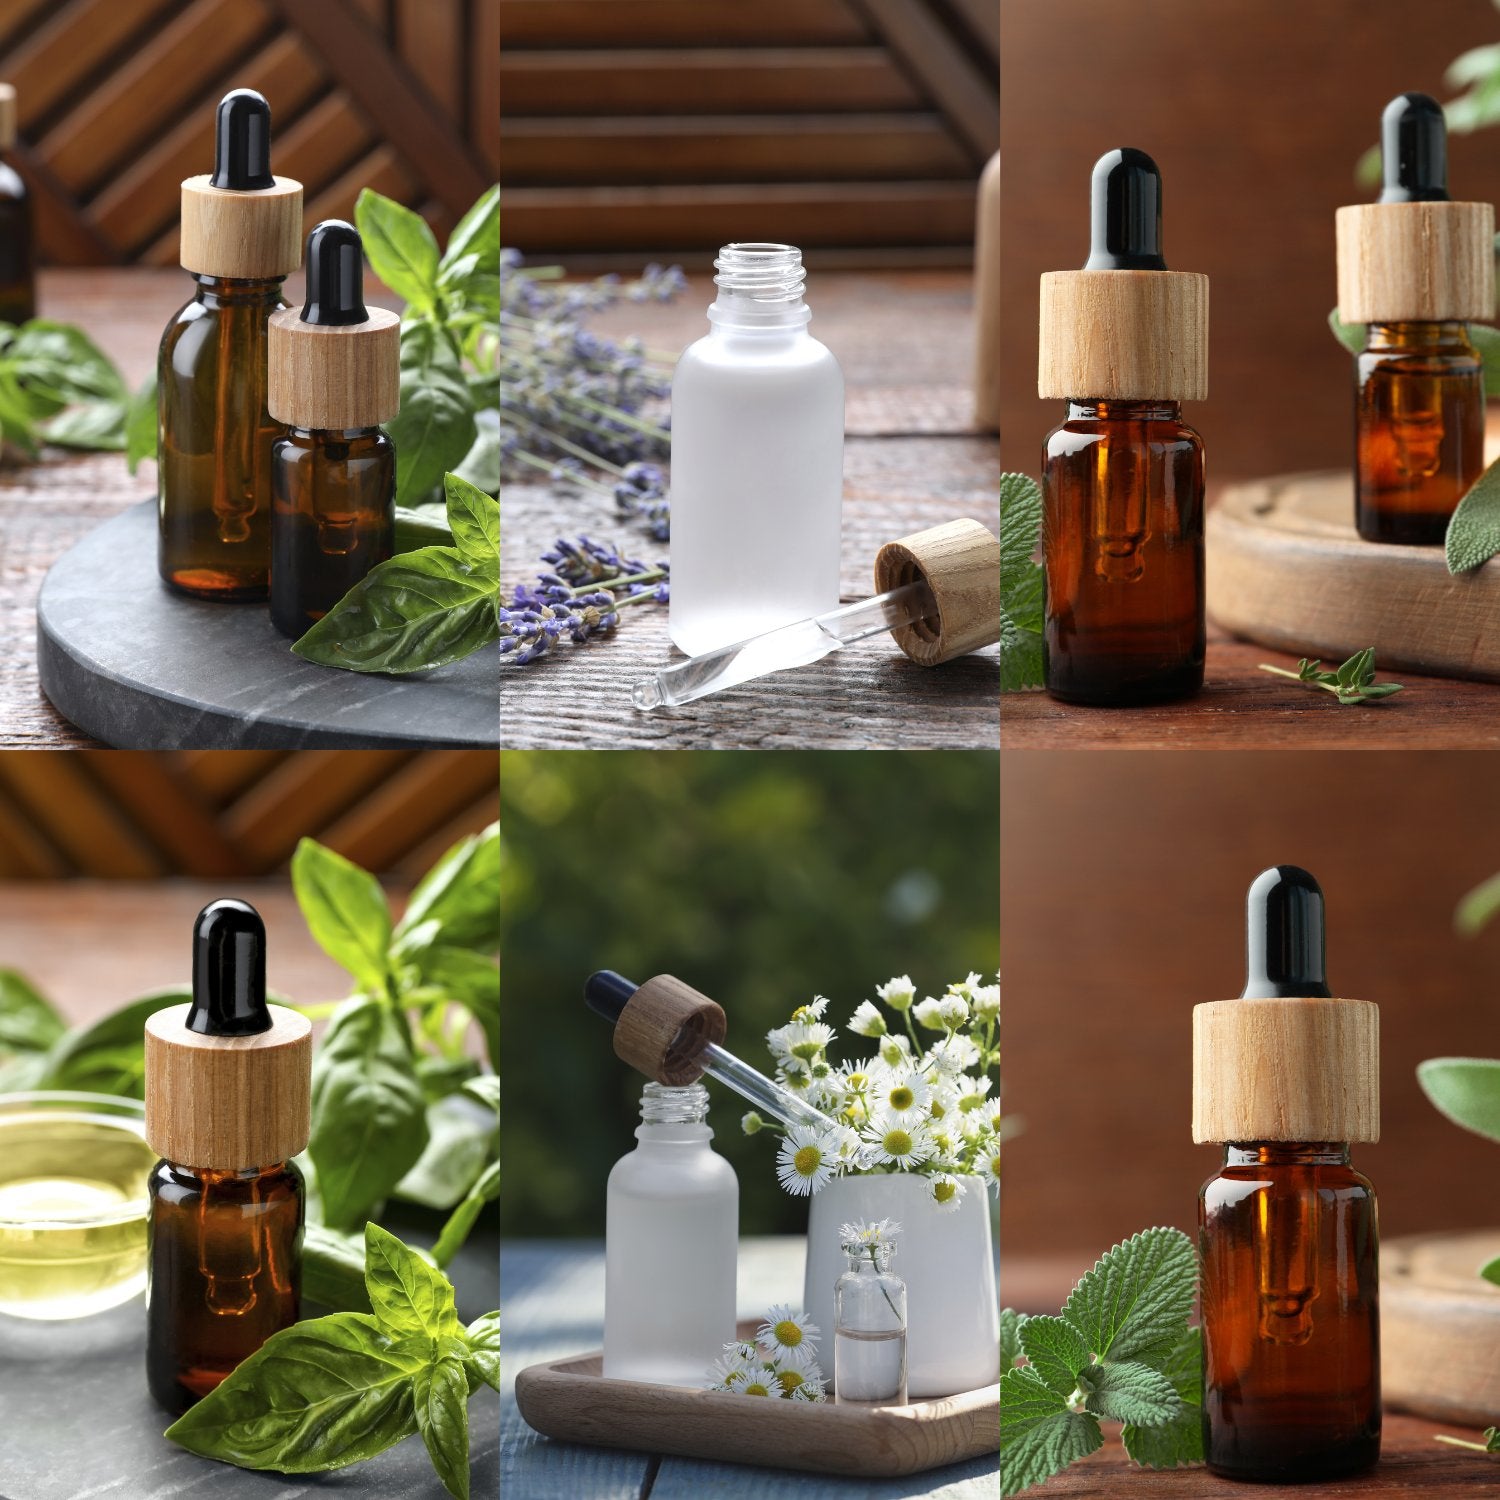 Essential Oil Scents